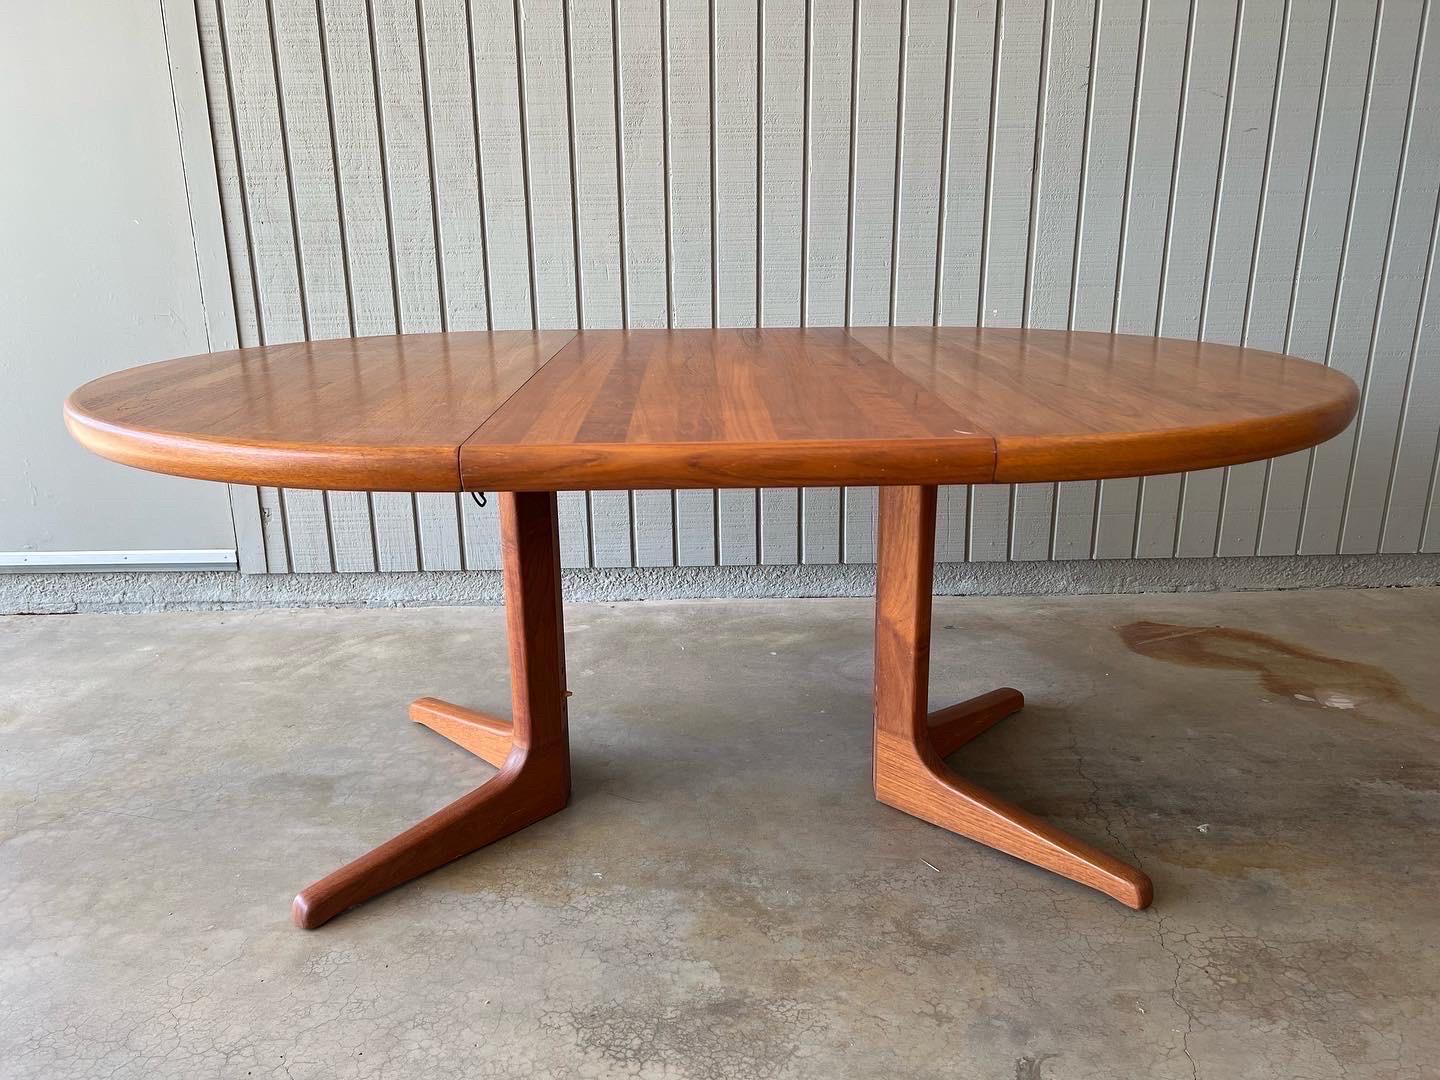 Mid century modern teak extending dining table with two leaves. It is a round pedestal table when no leaves are used. Danish, 1960s-70s, no maker’s mark but purchased from original owners that had it paired with Moller chairs. In excellent condition